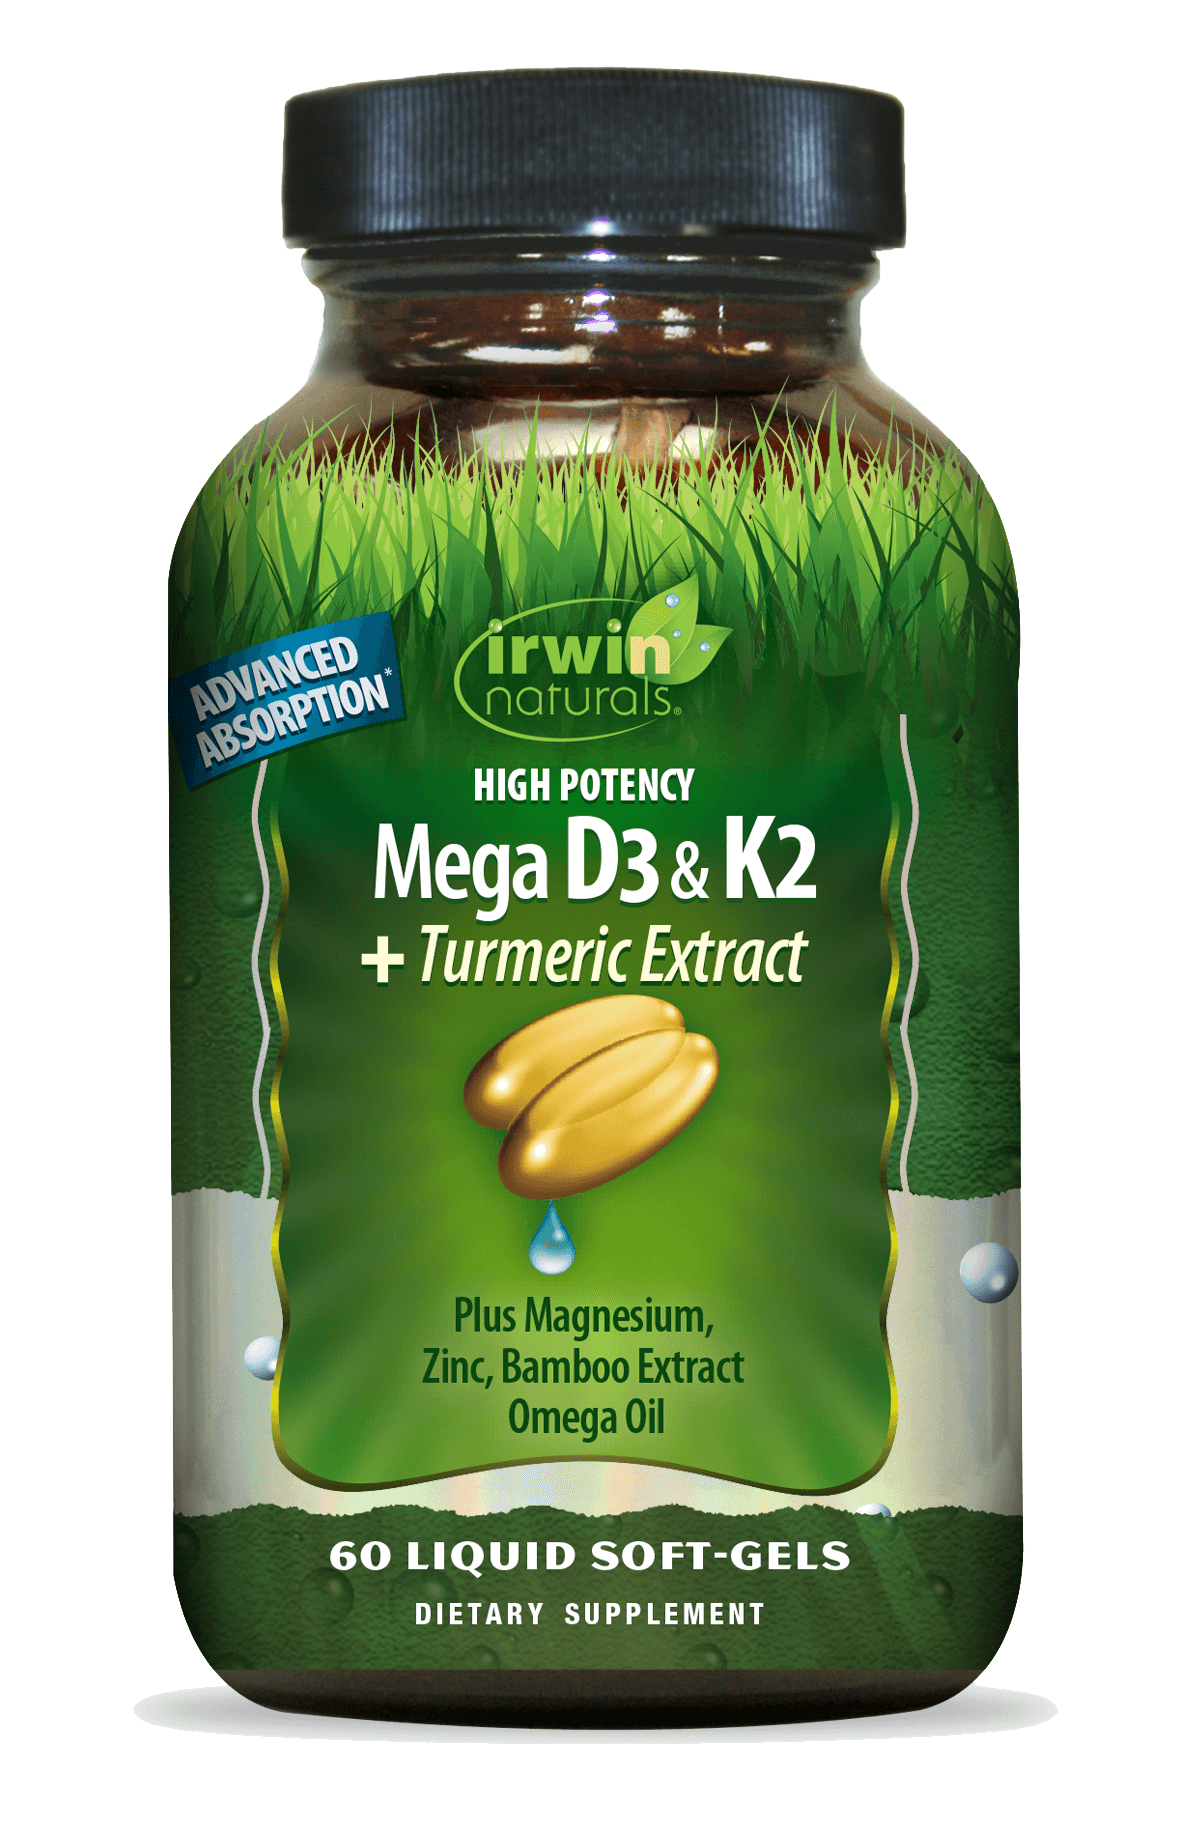 High Potency Mega D3 & K2 with Turmeric Extract by Irwin Naturals